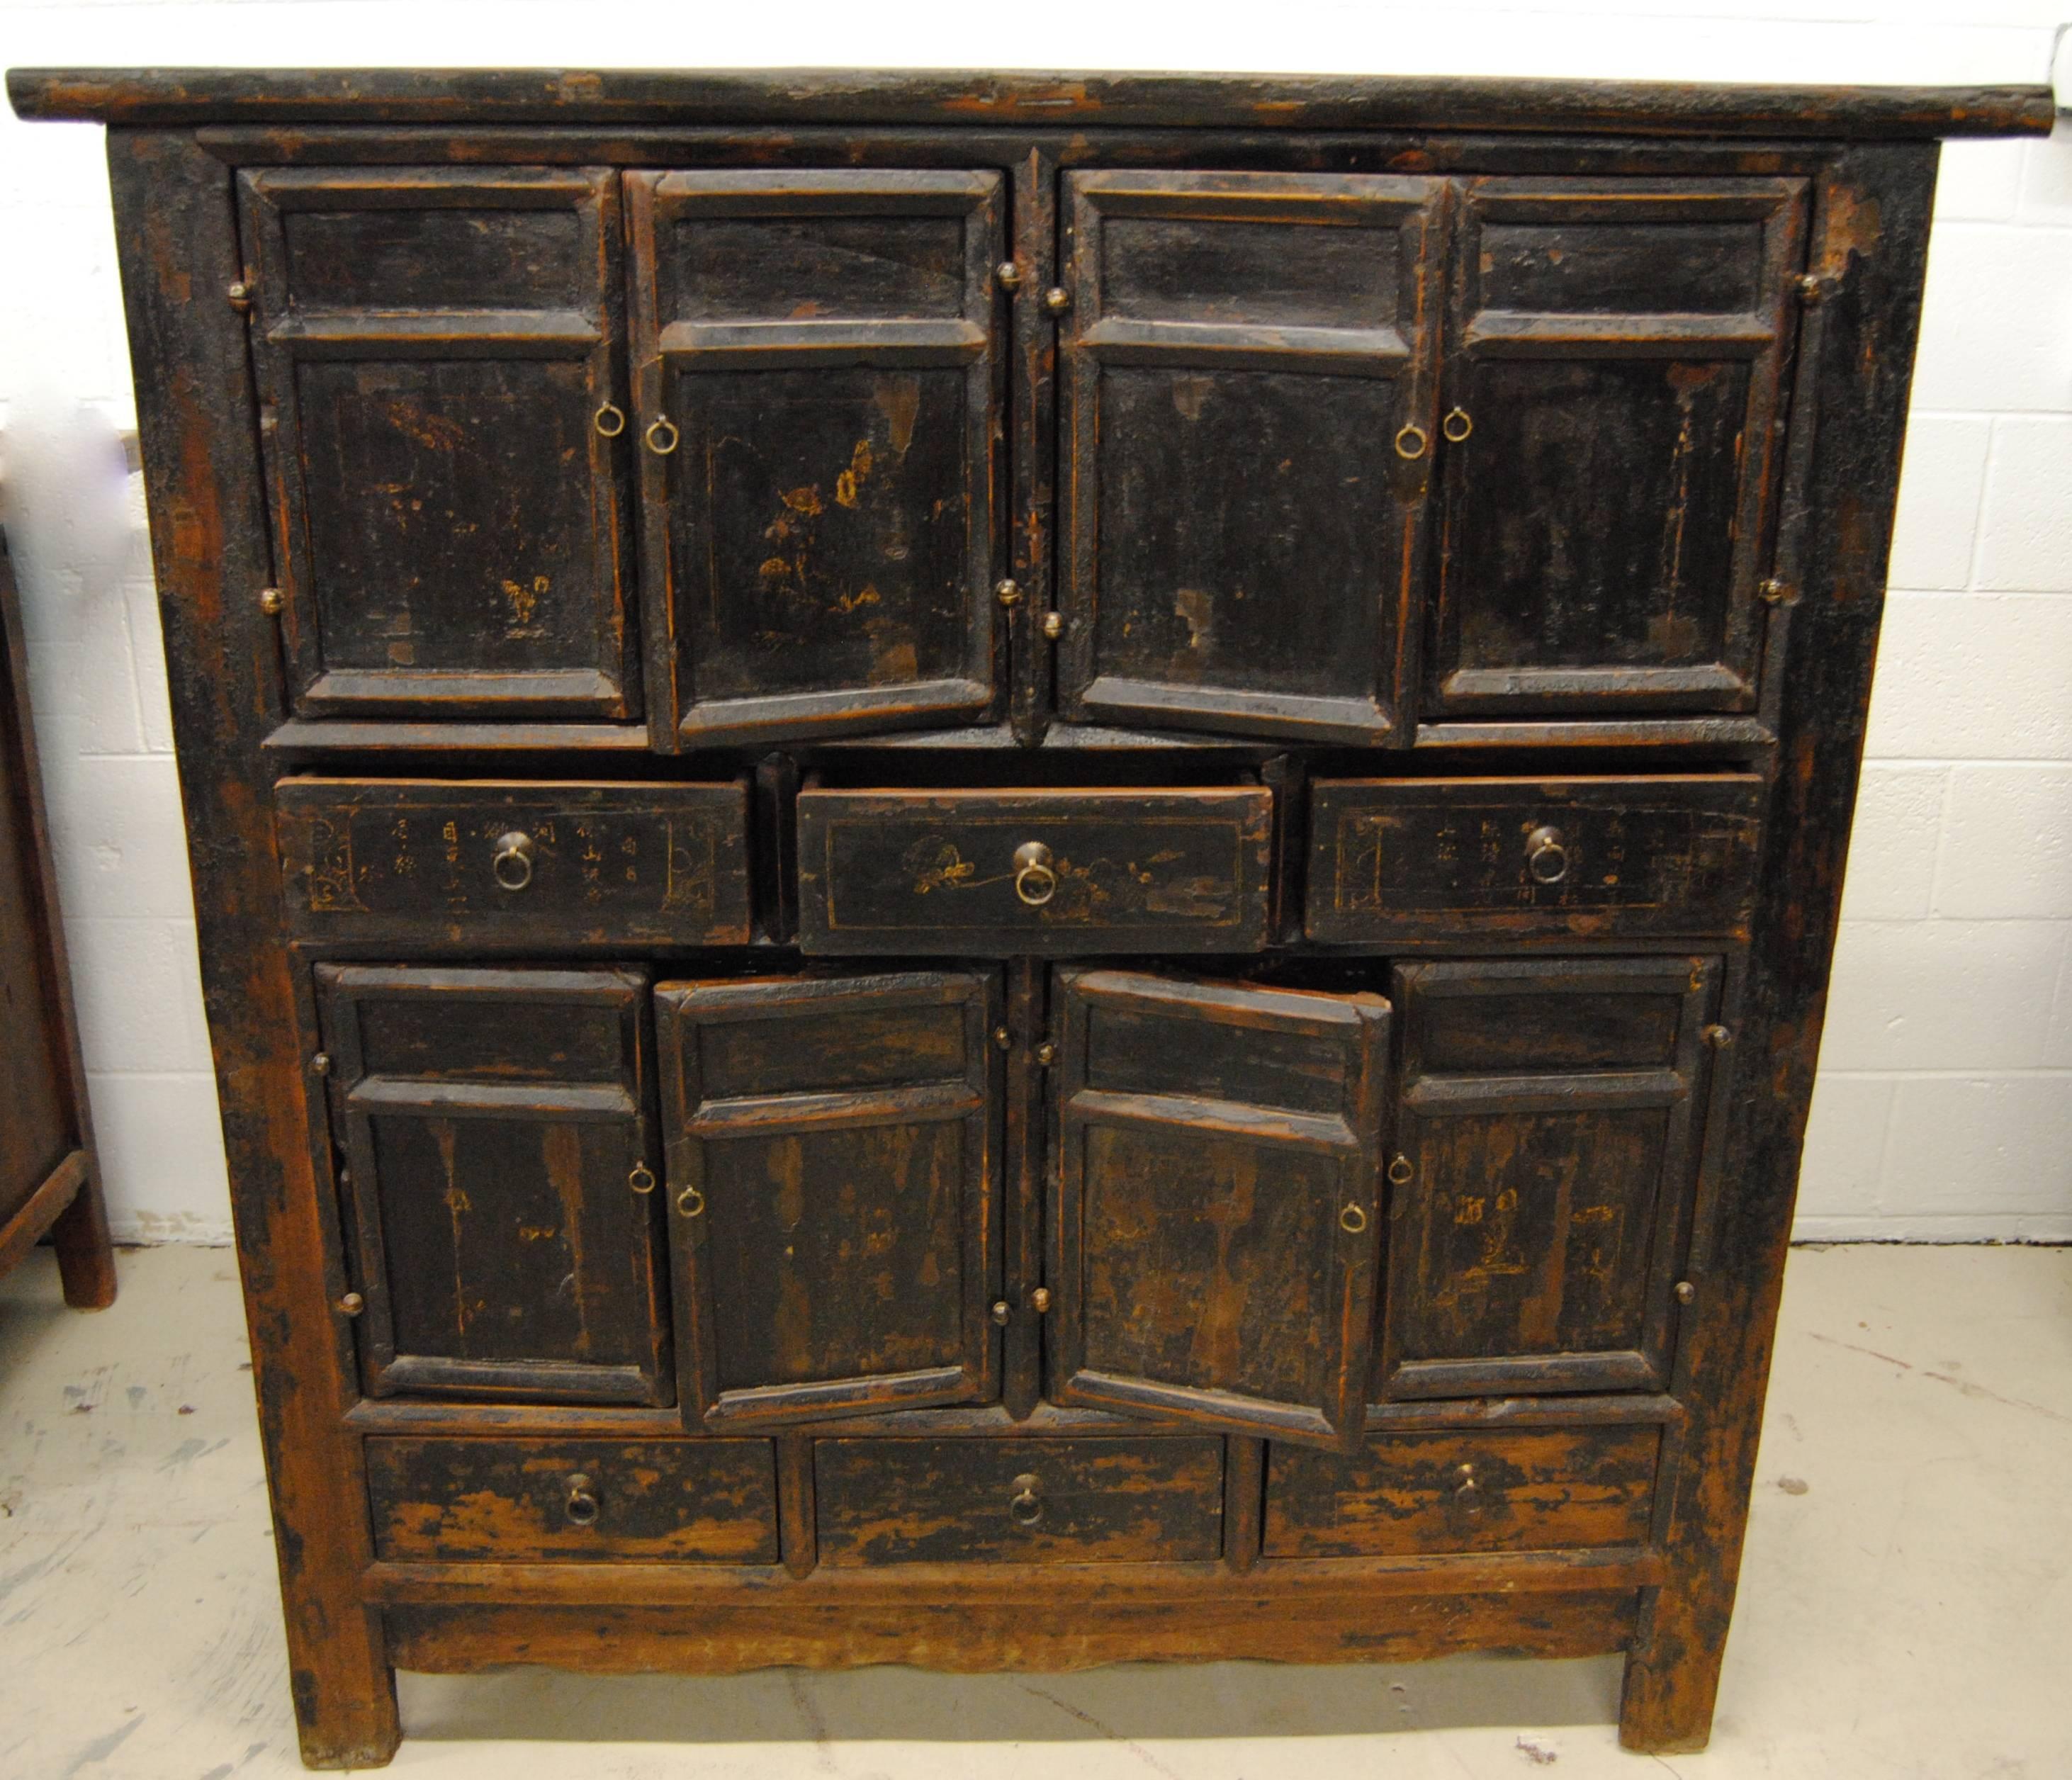 Antique Chinese six-drawer, four-bay elmwood armoire with lower scalloped apron. The Asian cabinet has all original lacquer with remnants of gold decorative calligraphy and figural that are just barely visible on the front panels of drawers and